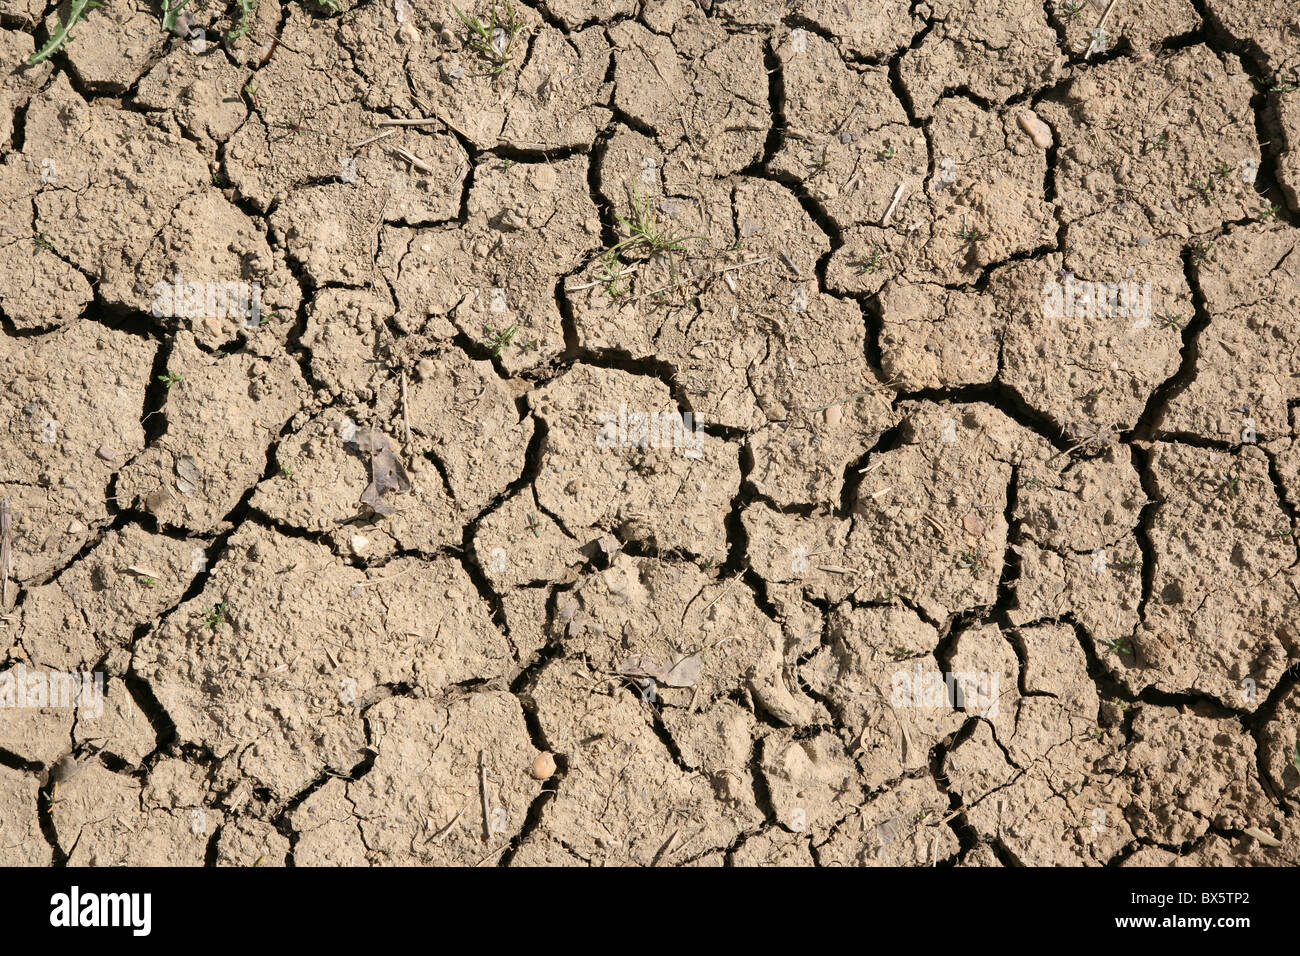 Parched dry earth Stock Photo